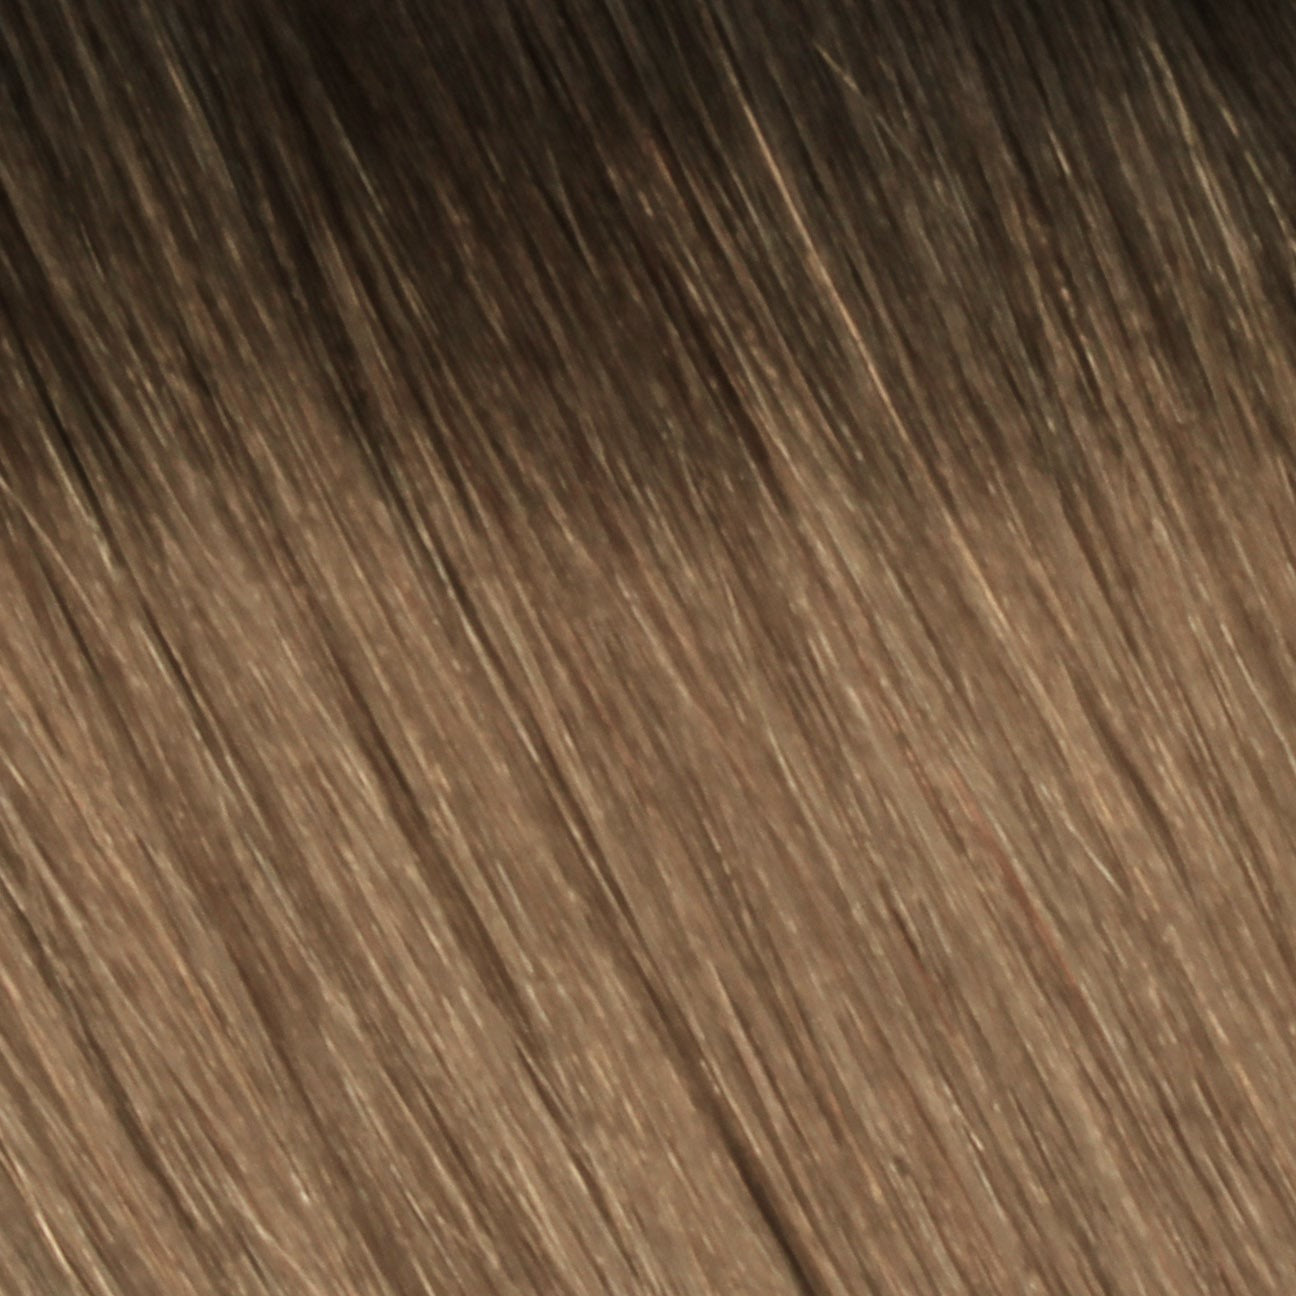 Nano Bonds 20 Inches - SWAY Hair Extensions Rooted-Sunkissed-Brown-R2-8-10 Ultra-fine, invisible bonds for a flawless, natural look. 100% Remy Human hair, lightweight and versatile. Reusable and perfect for individual or salon use.